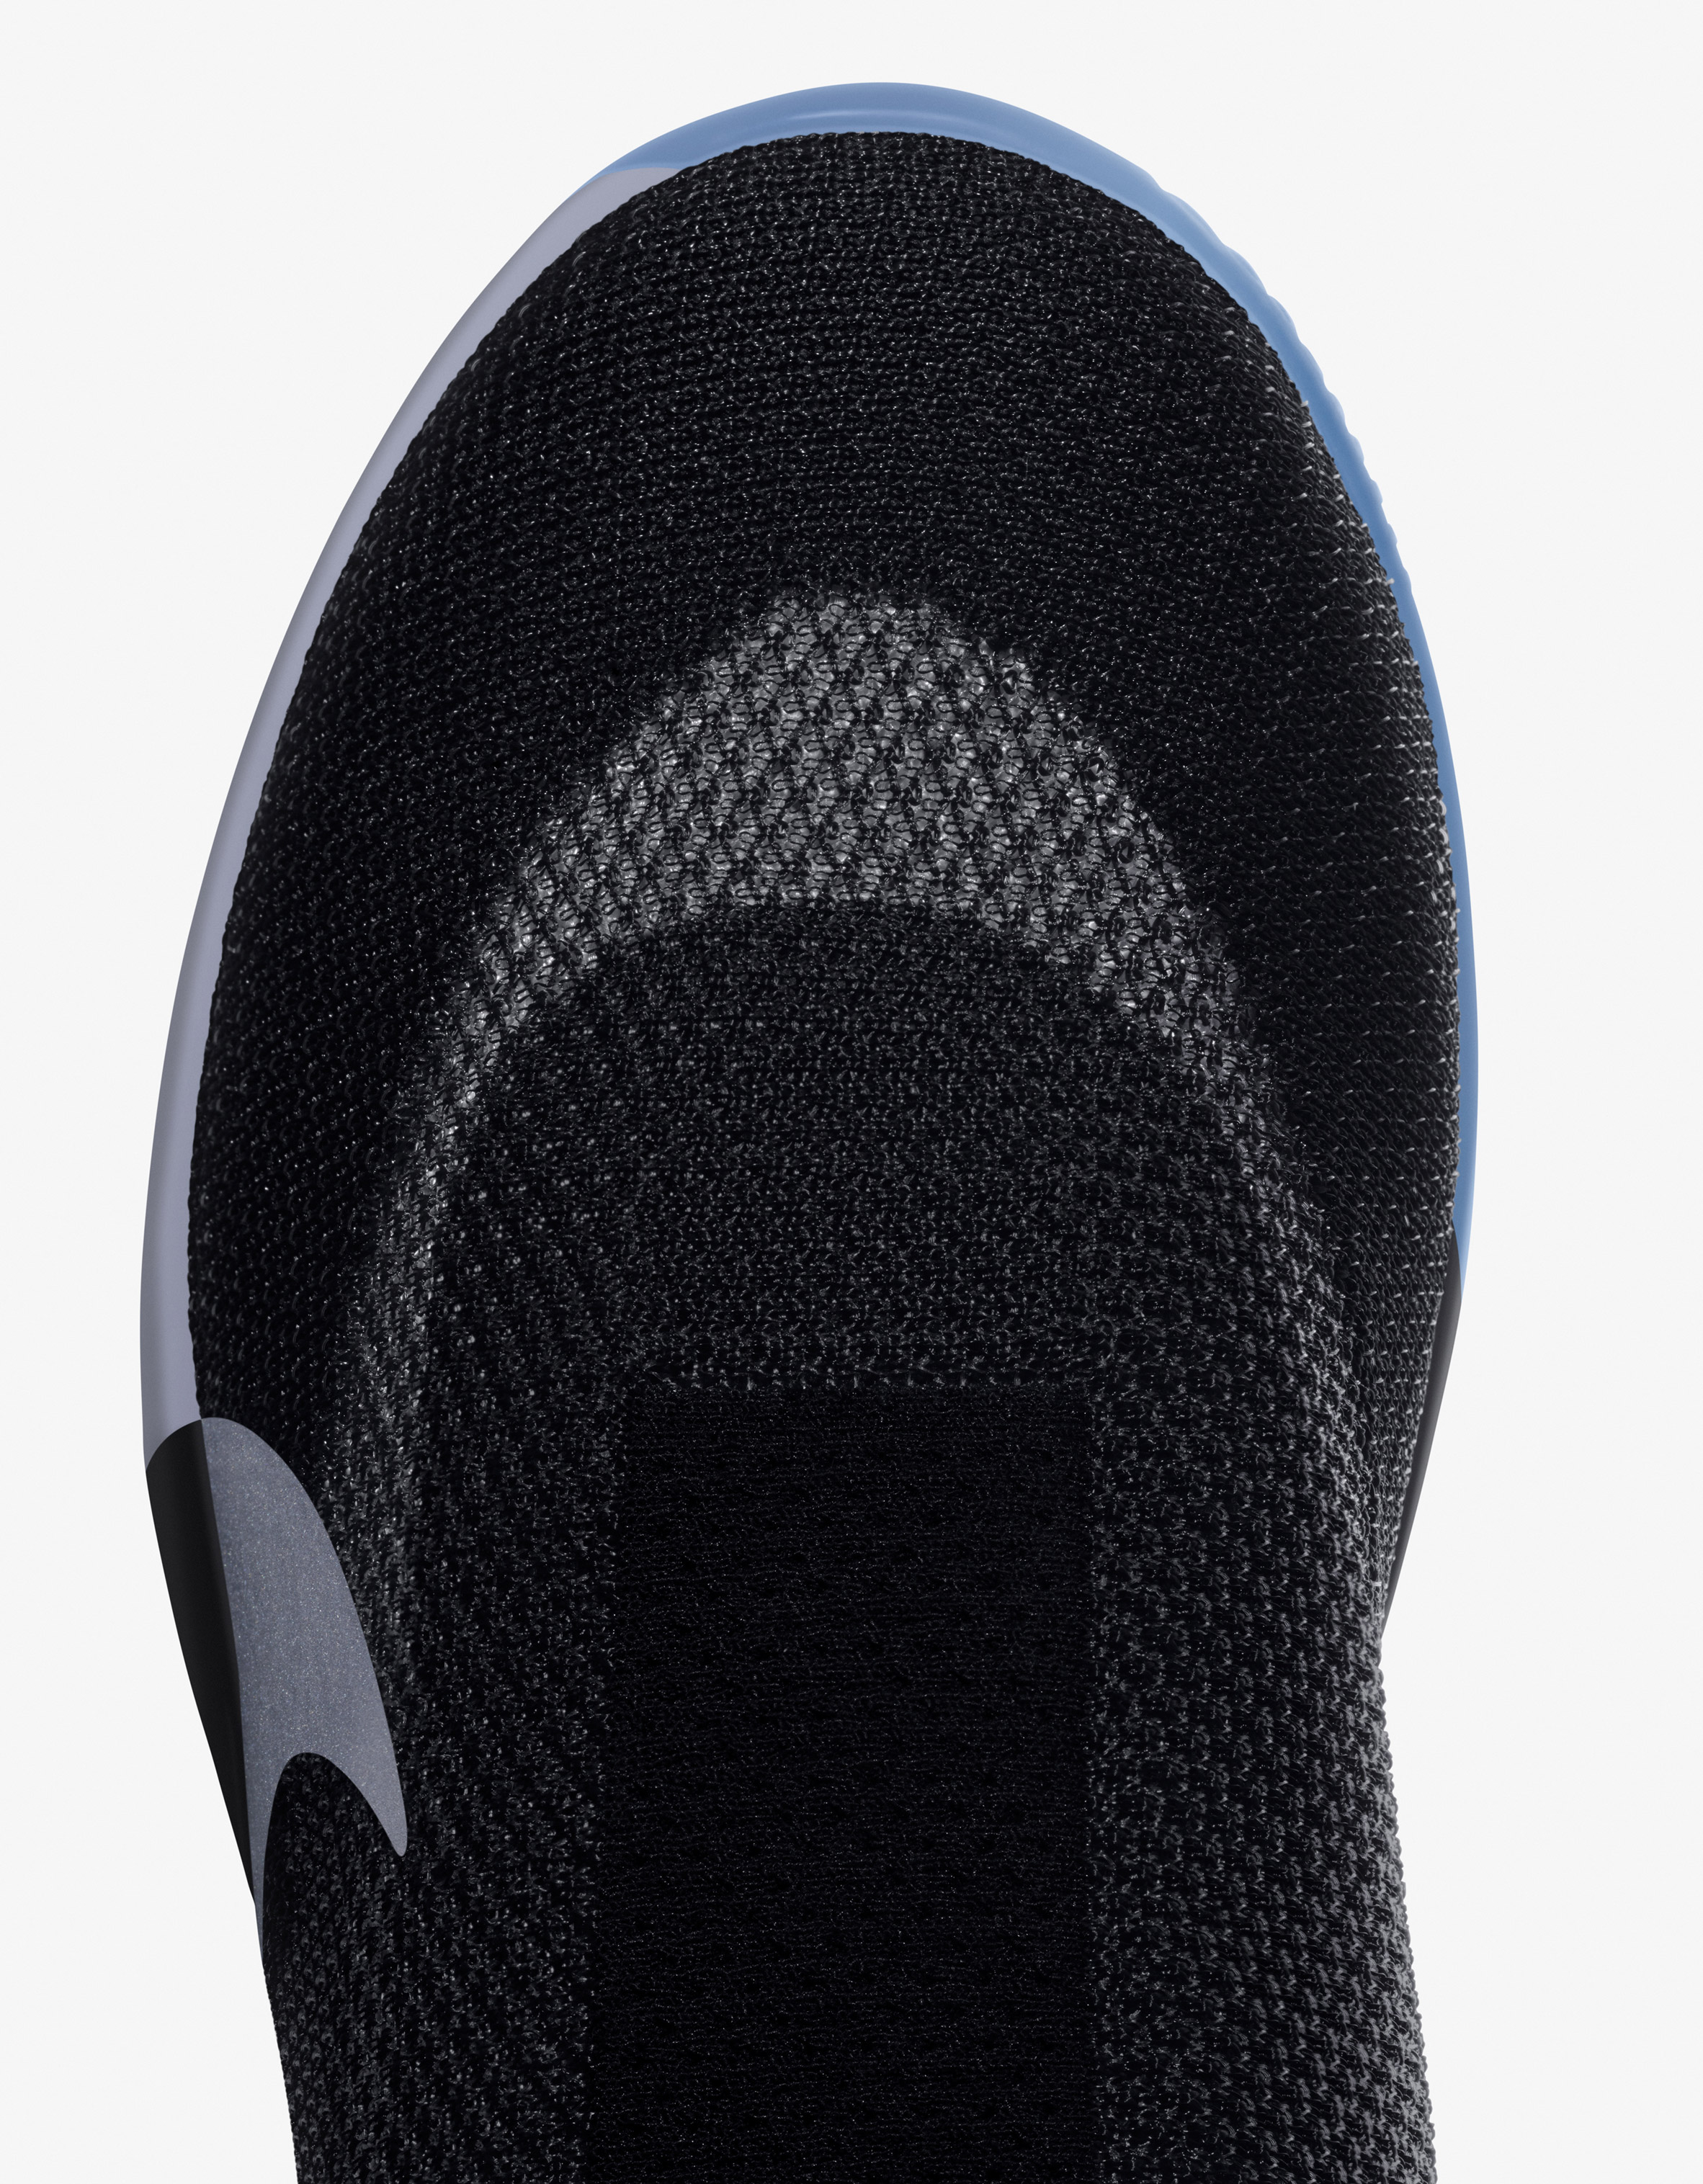 Nike Adapt BB smart basketball sneakers feature self-lacing technology